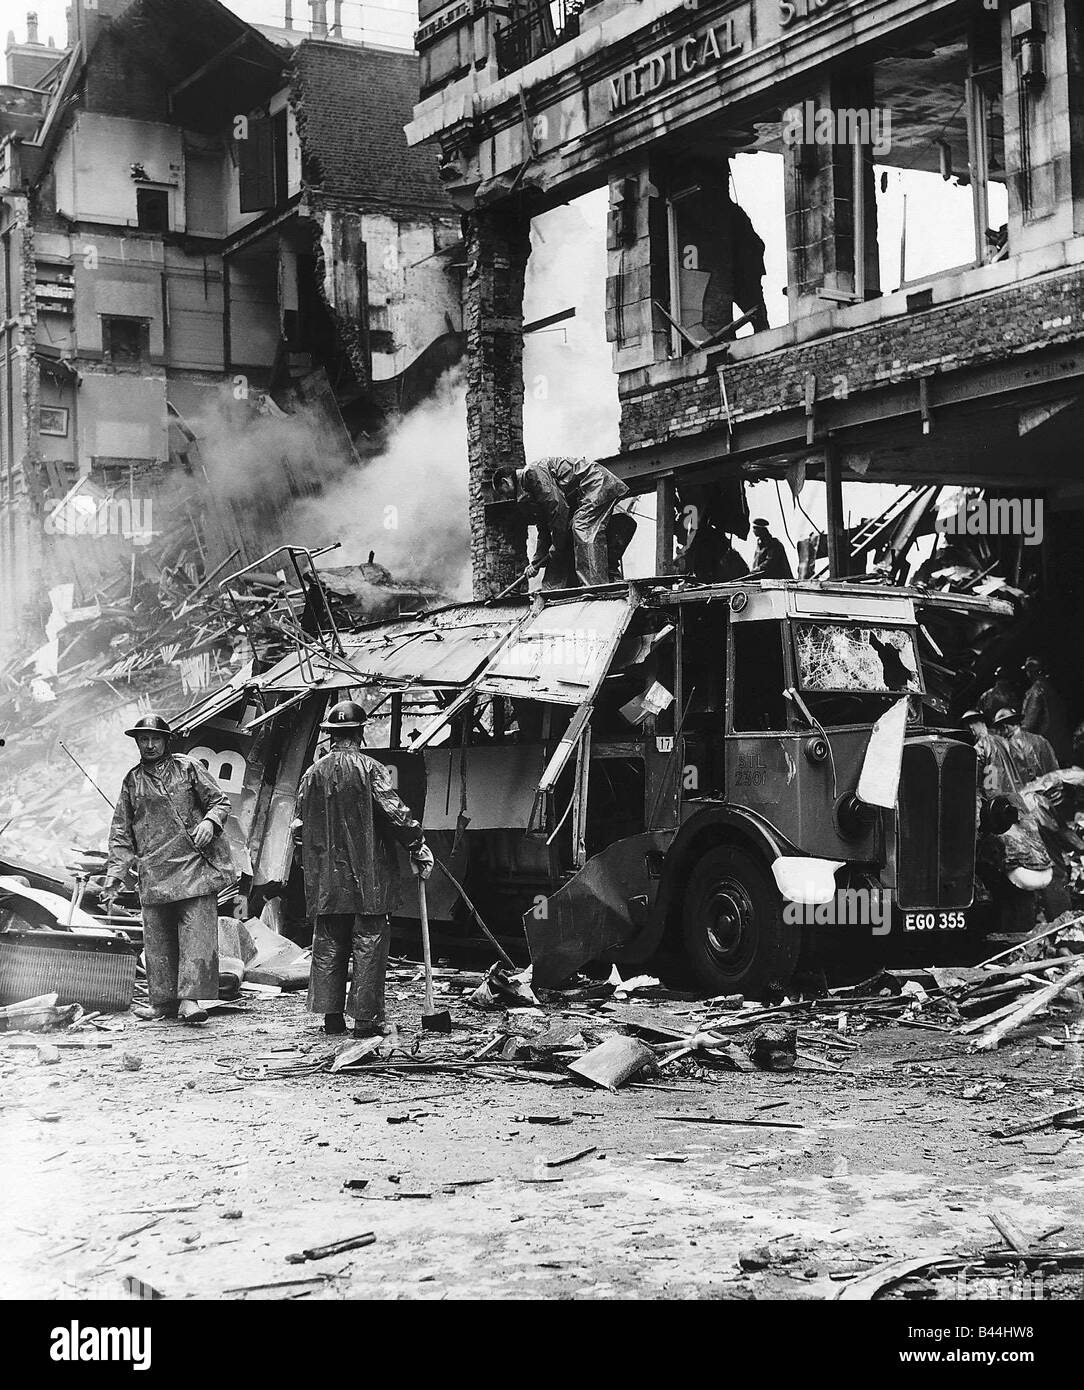 Rescue workers clear a London double decker bus damaged by the blast from a bomb during WW2 air raid 1940 Stock Photo